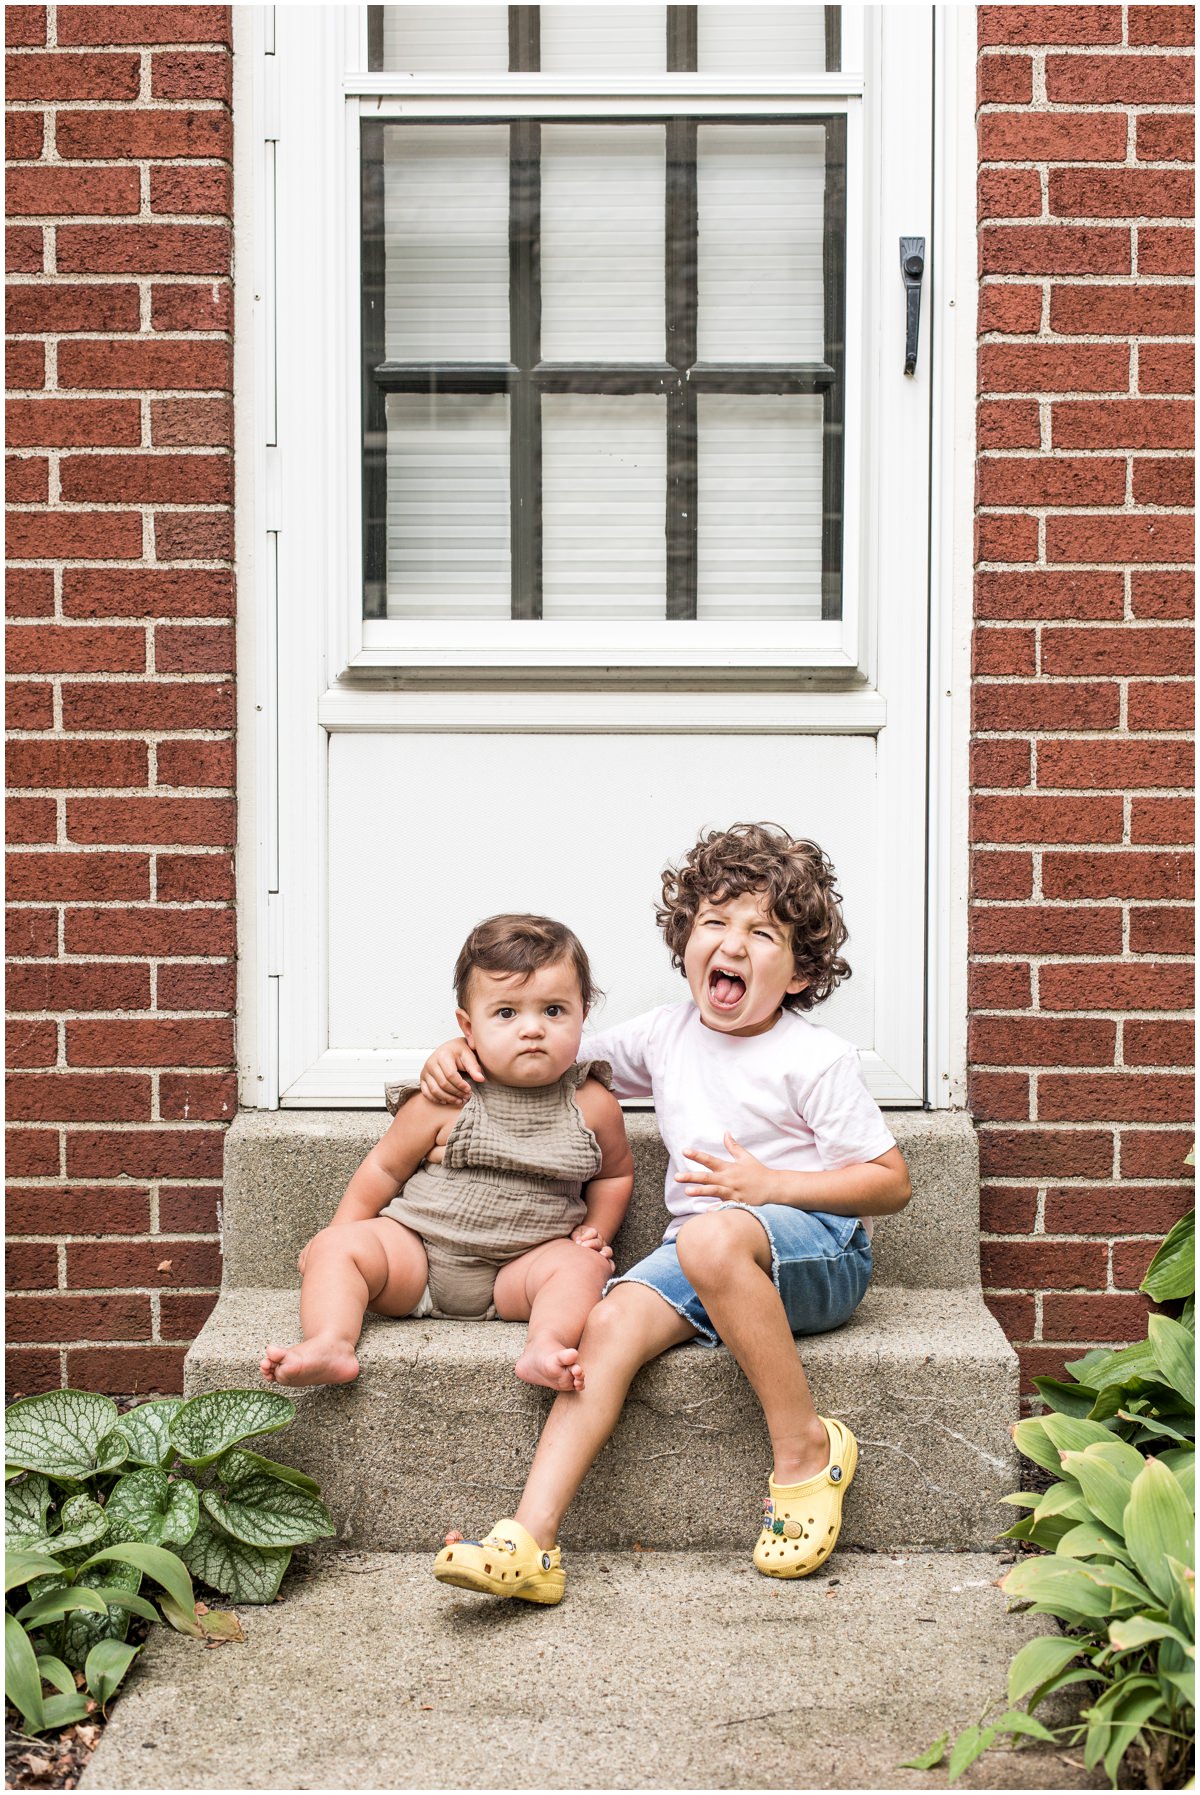 adam lowe photography, family session, kids, parents, columbus, ohio, photographer, at home session